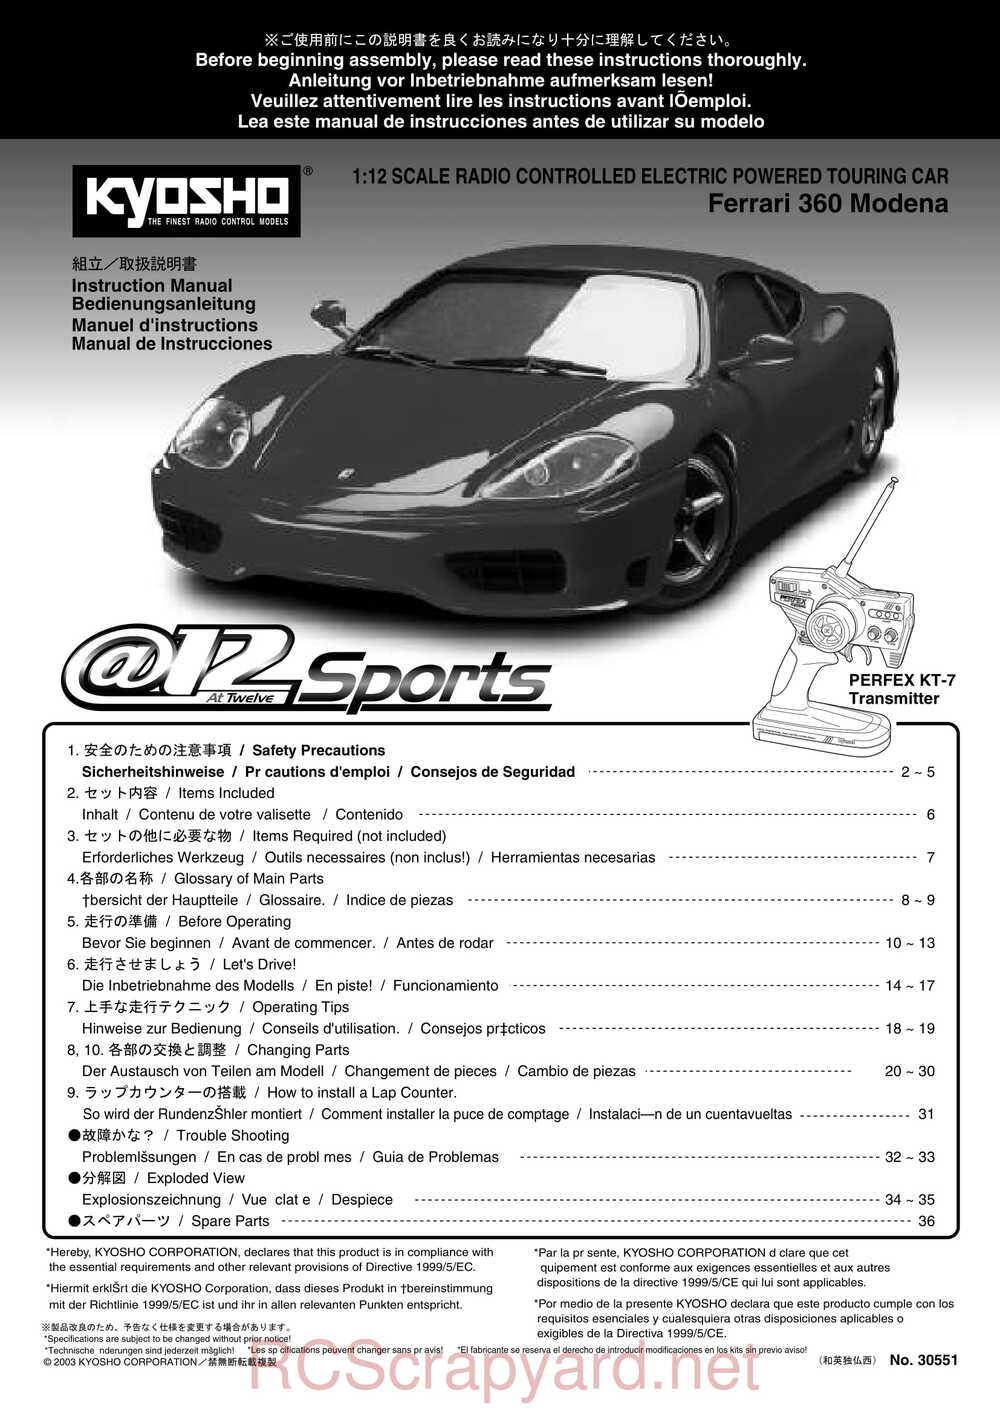 Kyosho - 30551 - a12 Sport - Manual - Page 01